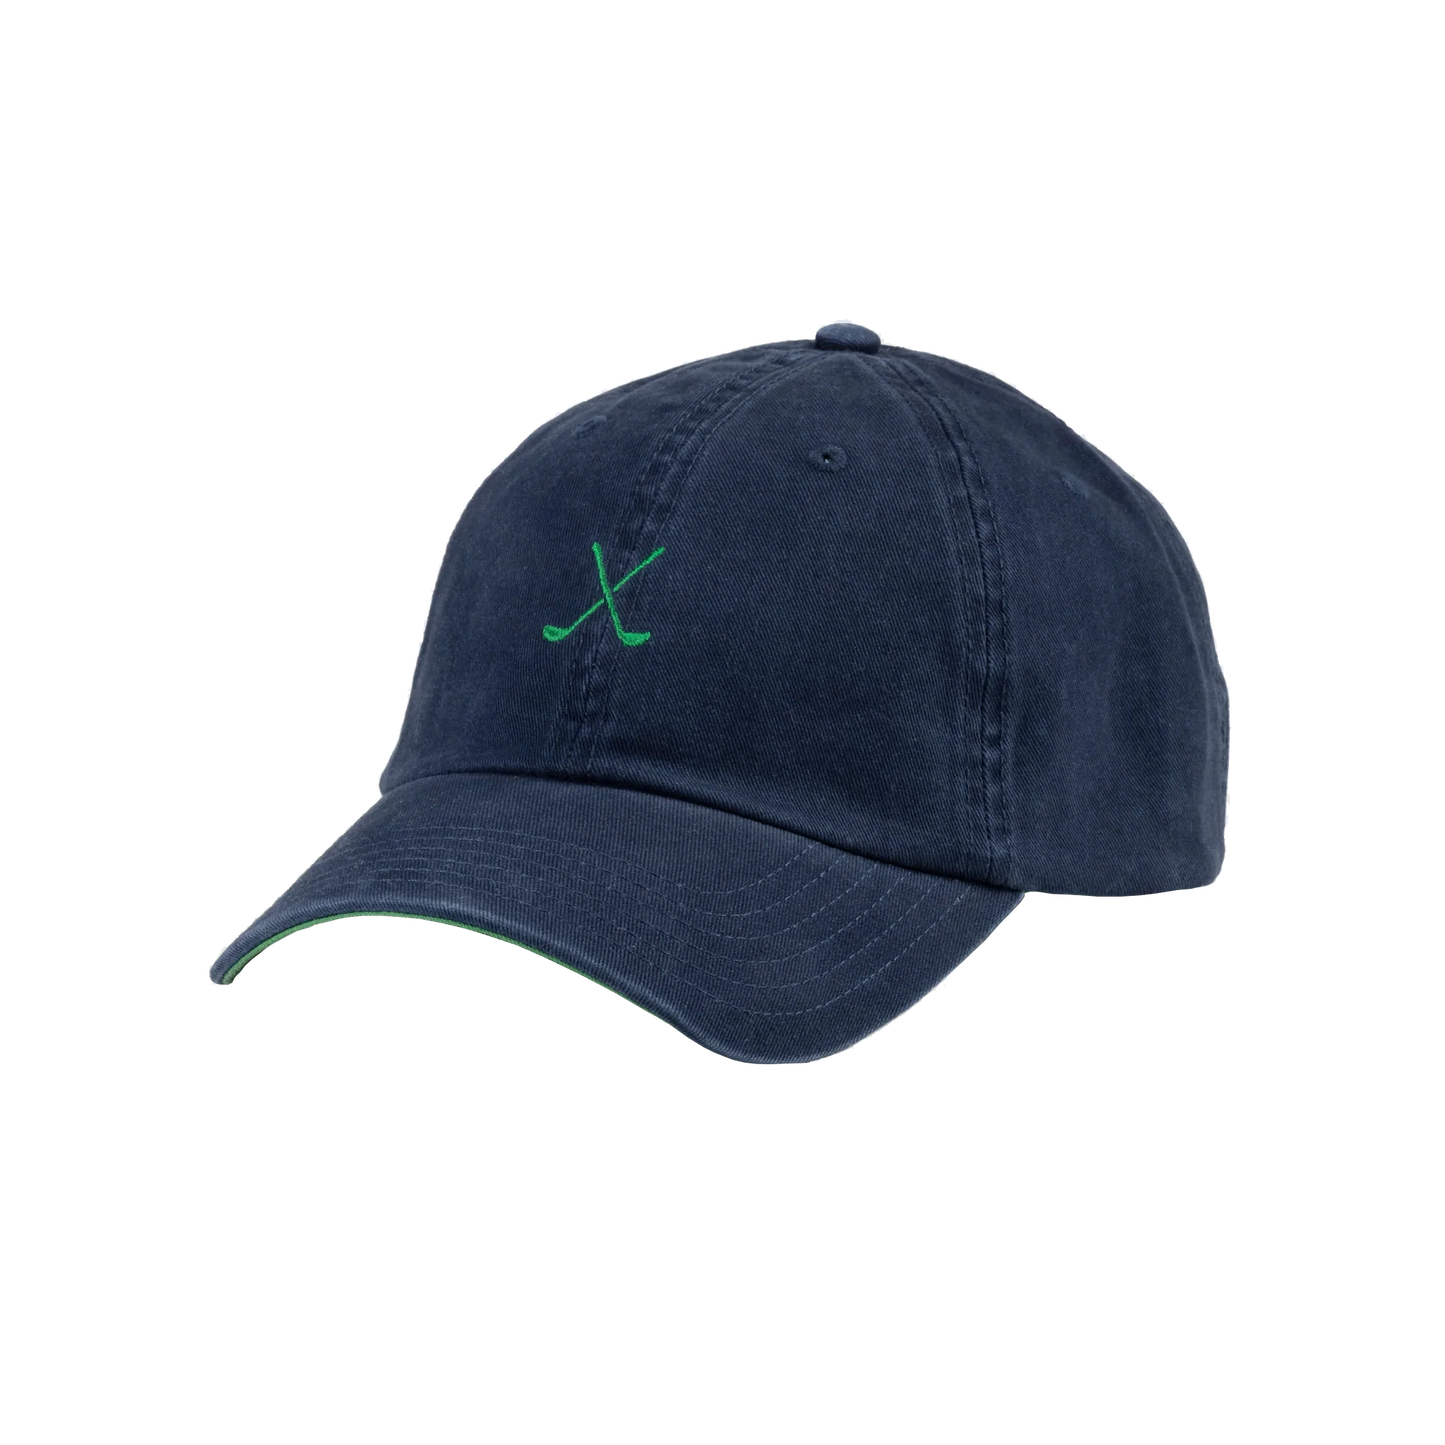 Clubs Cap Navy and Green